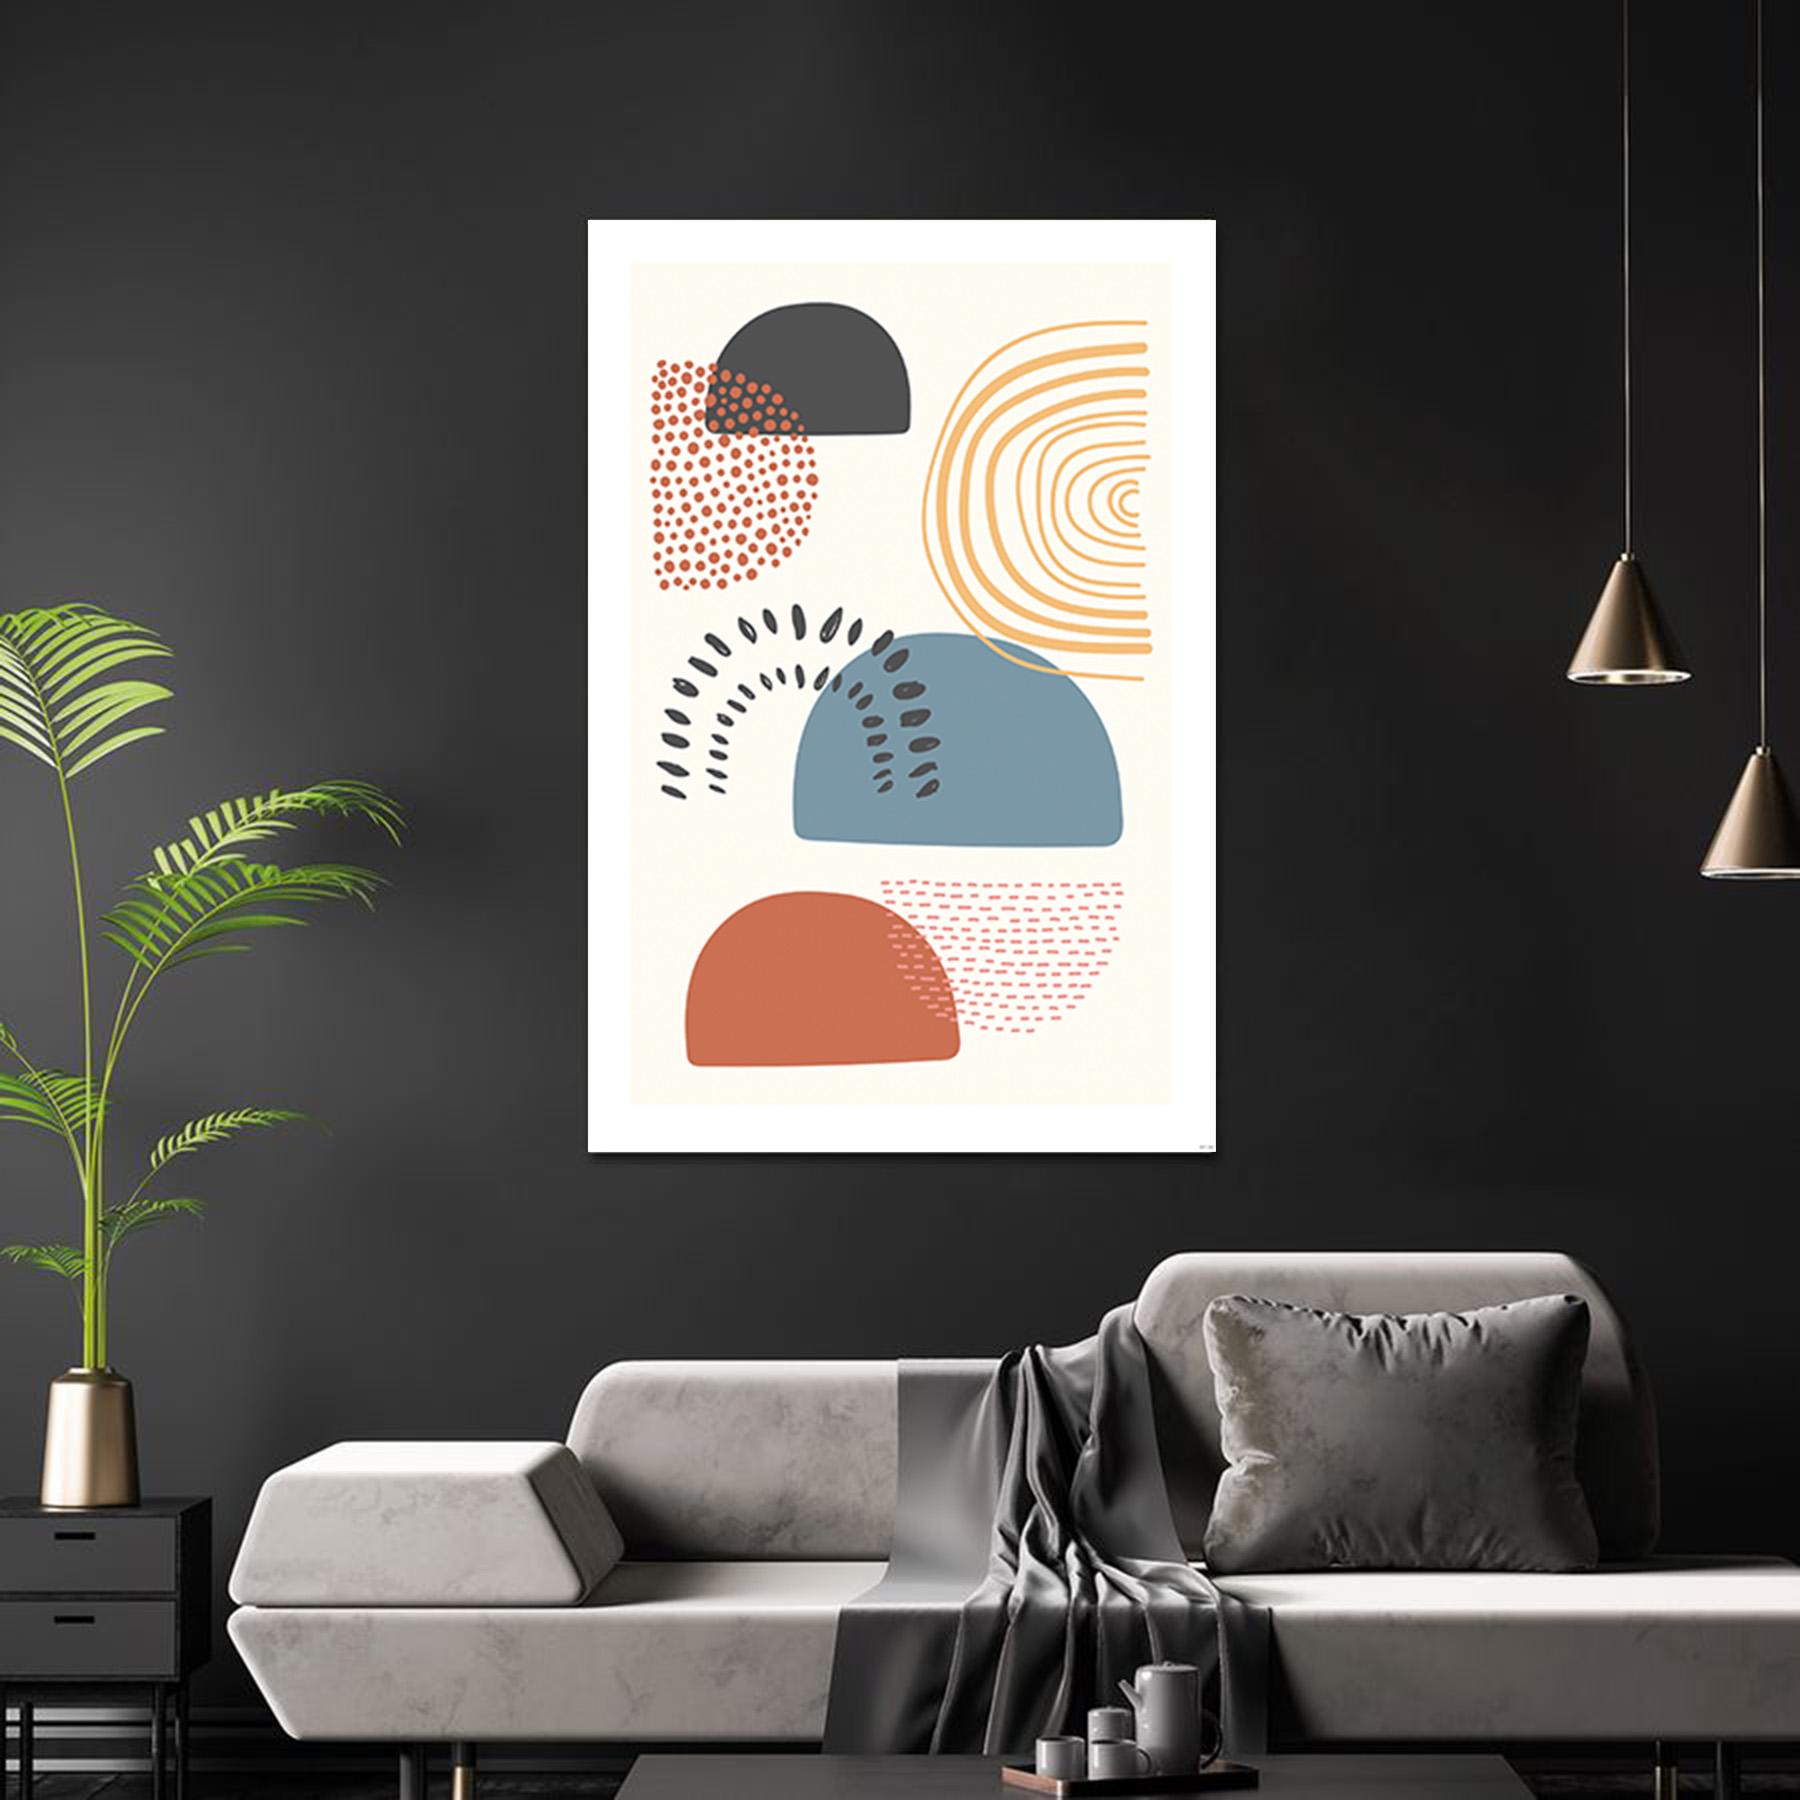 Abstract Shapes Poster Abstrakte Formen